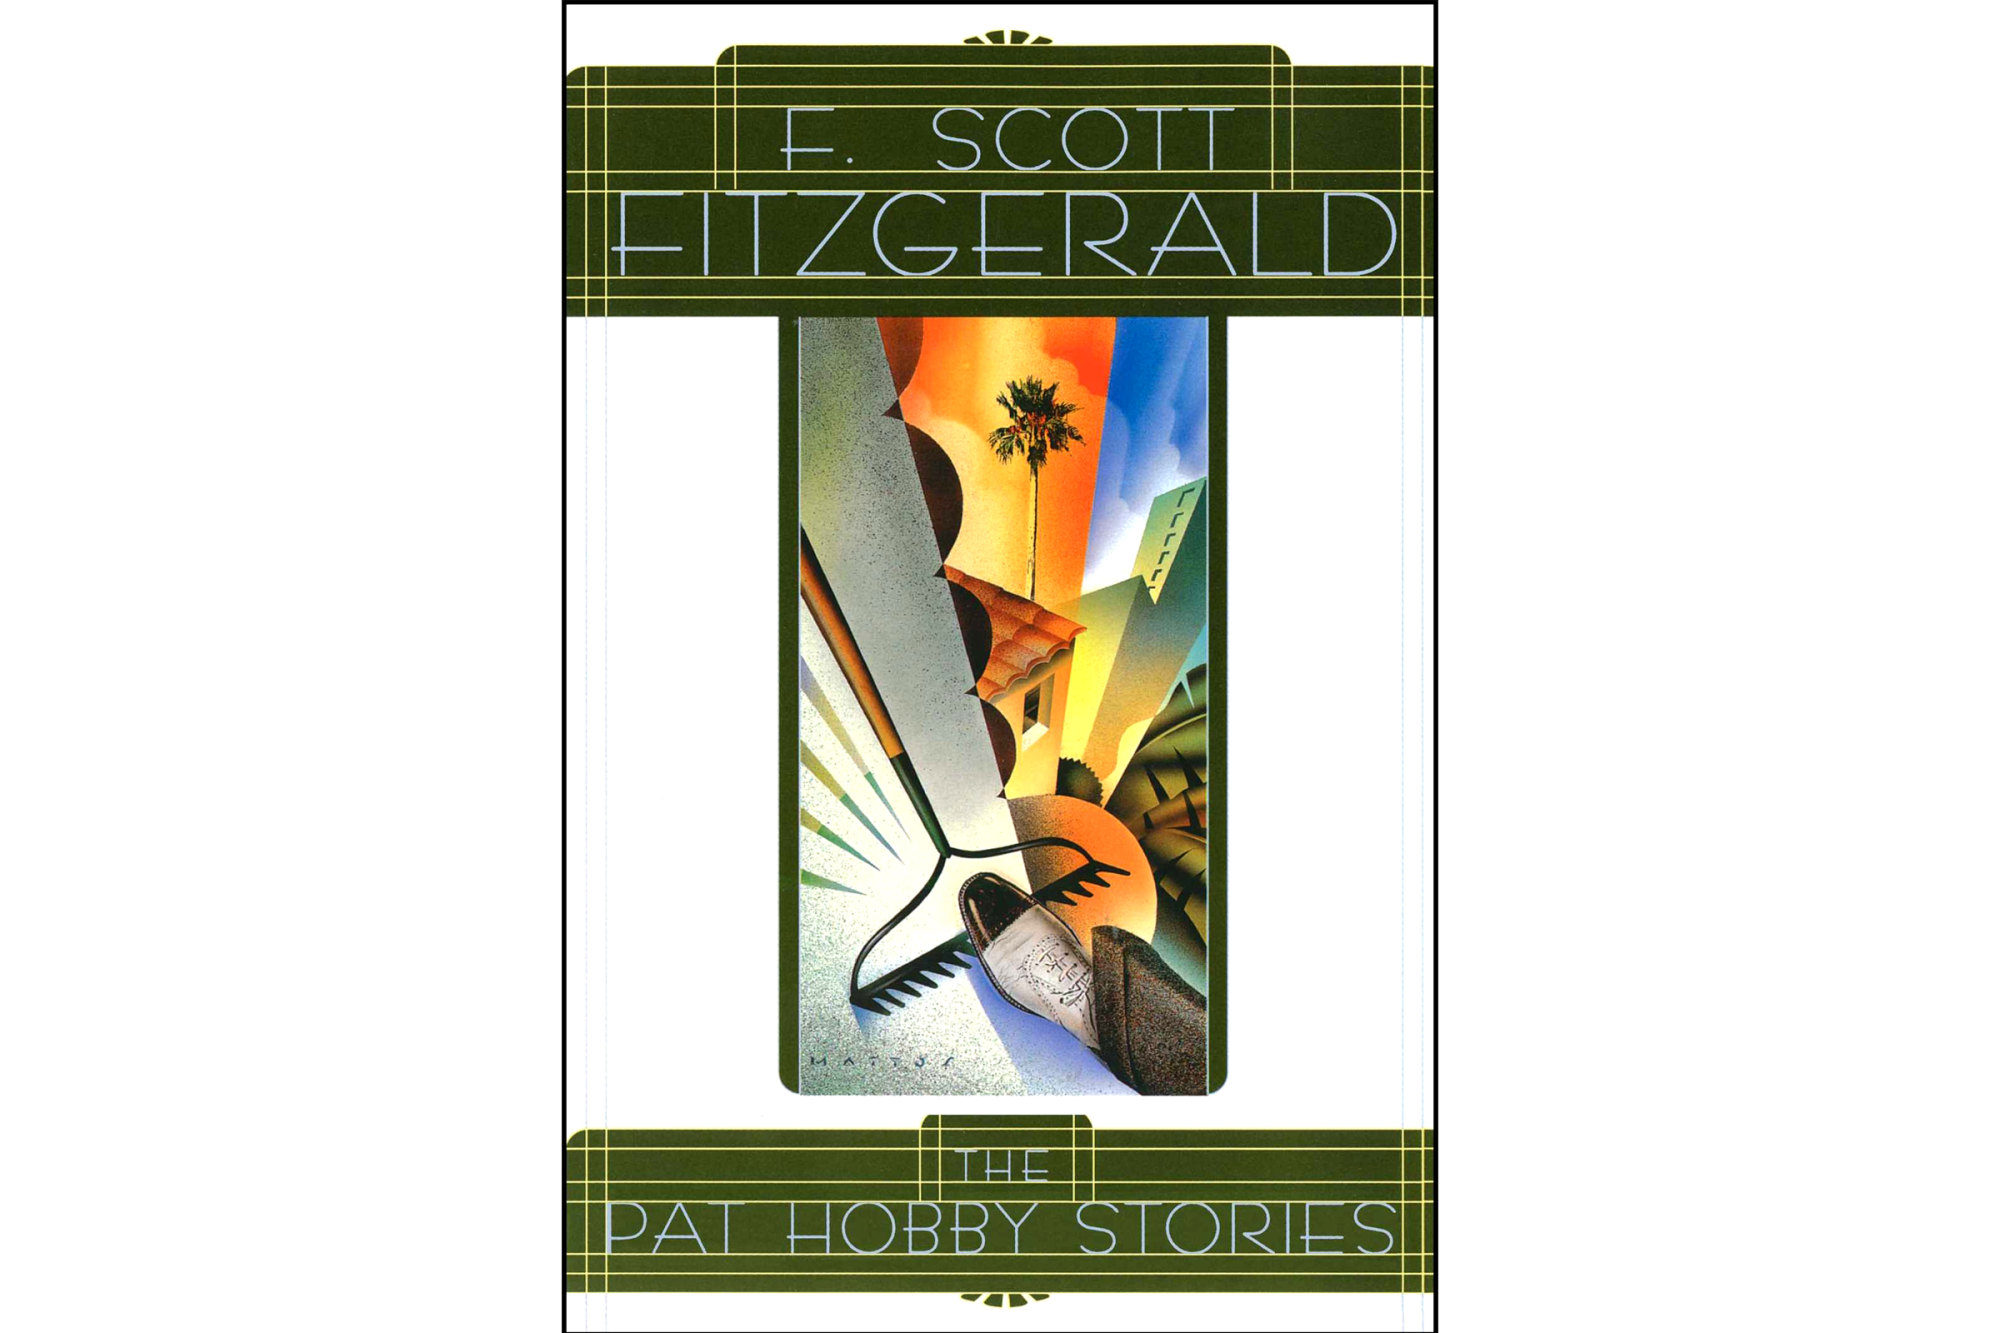 "The Pat Hobby Stories" by F. Scott Fitzgerald